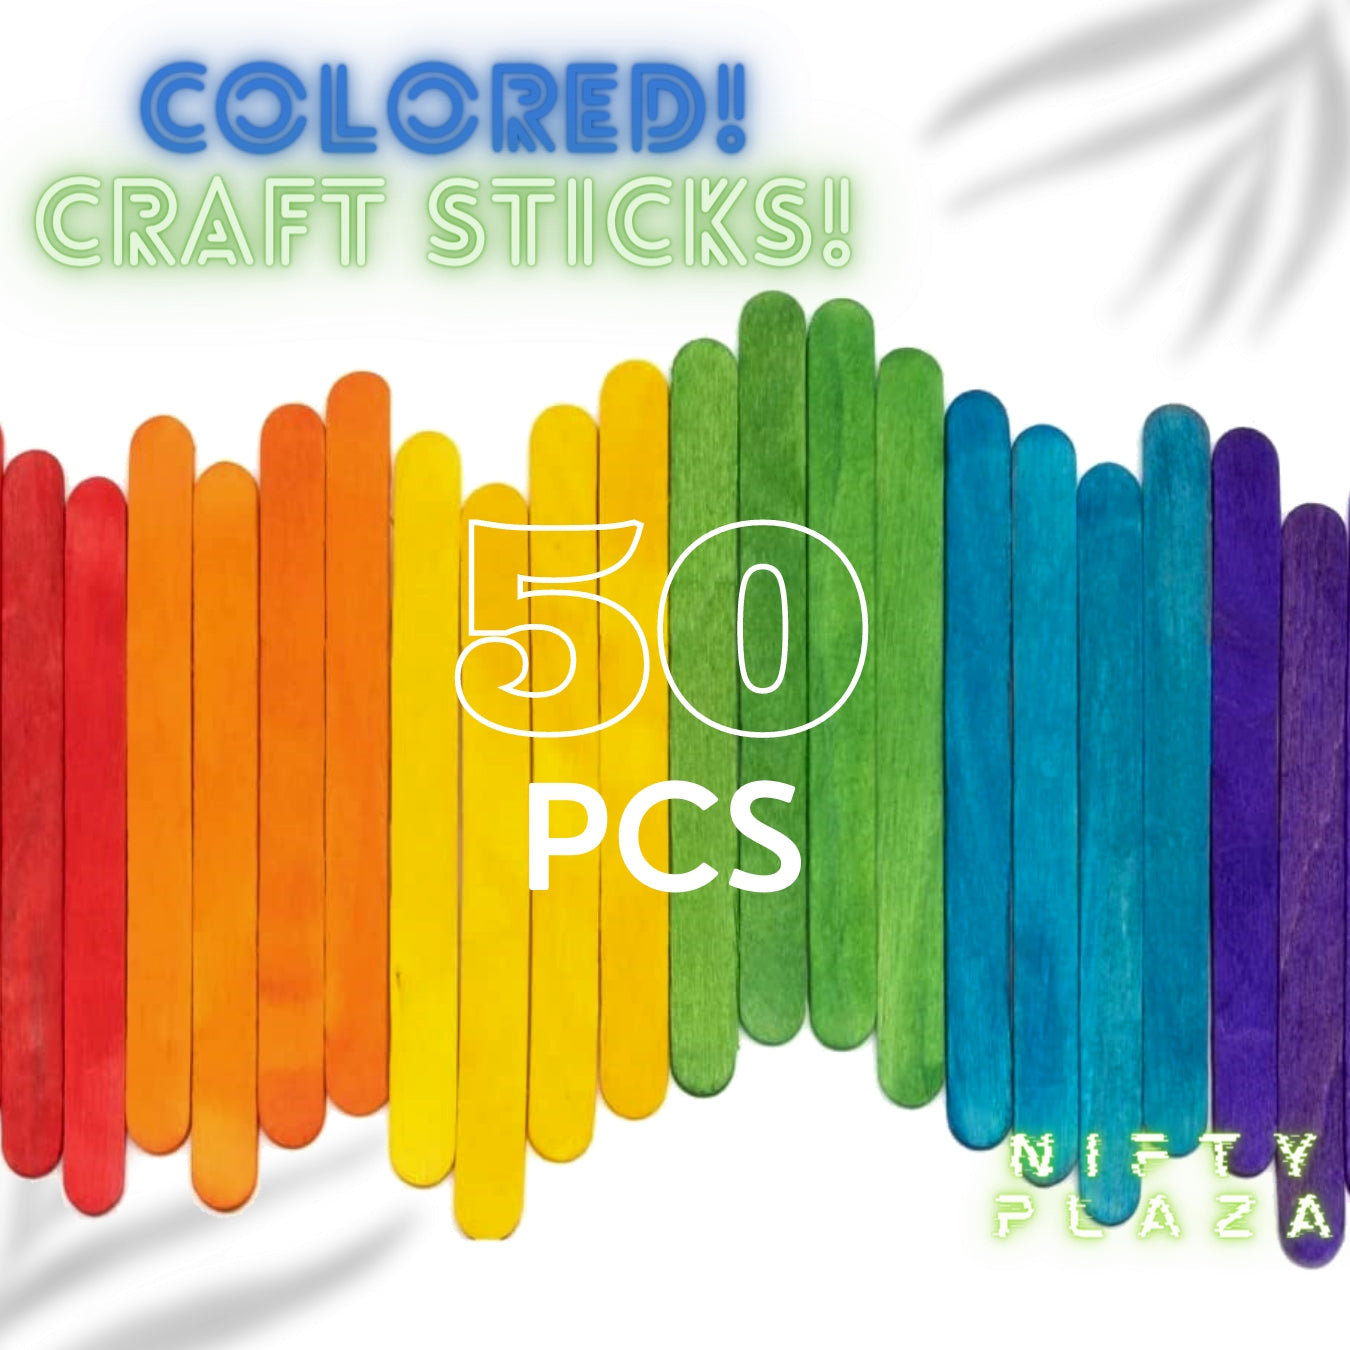 NiftyPlaza 50 Pieces Multicolored Craft Sticks for Building, Mixing, Creating Craft Projects